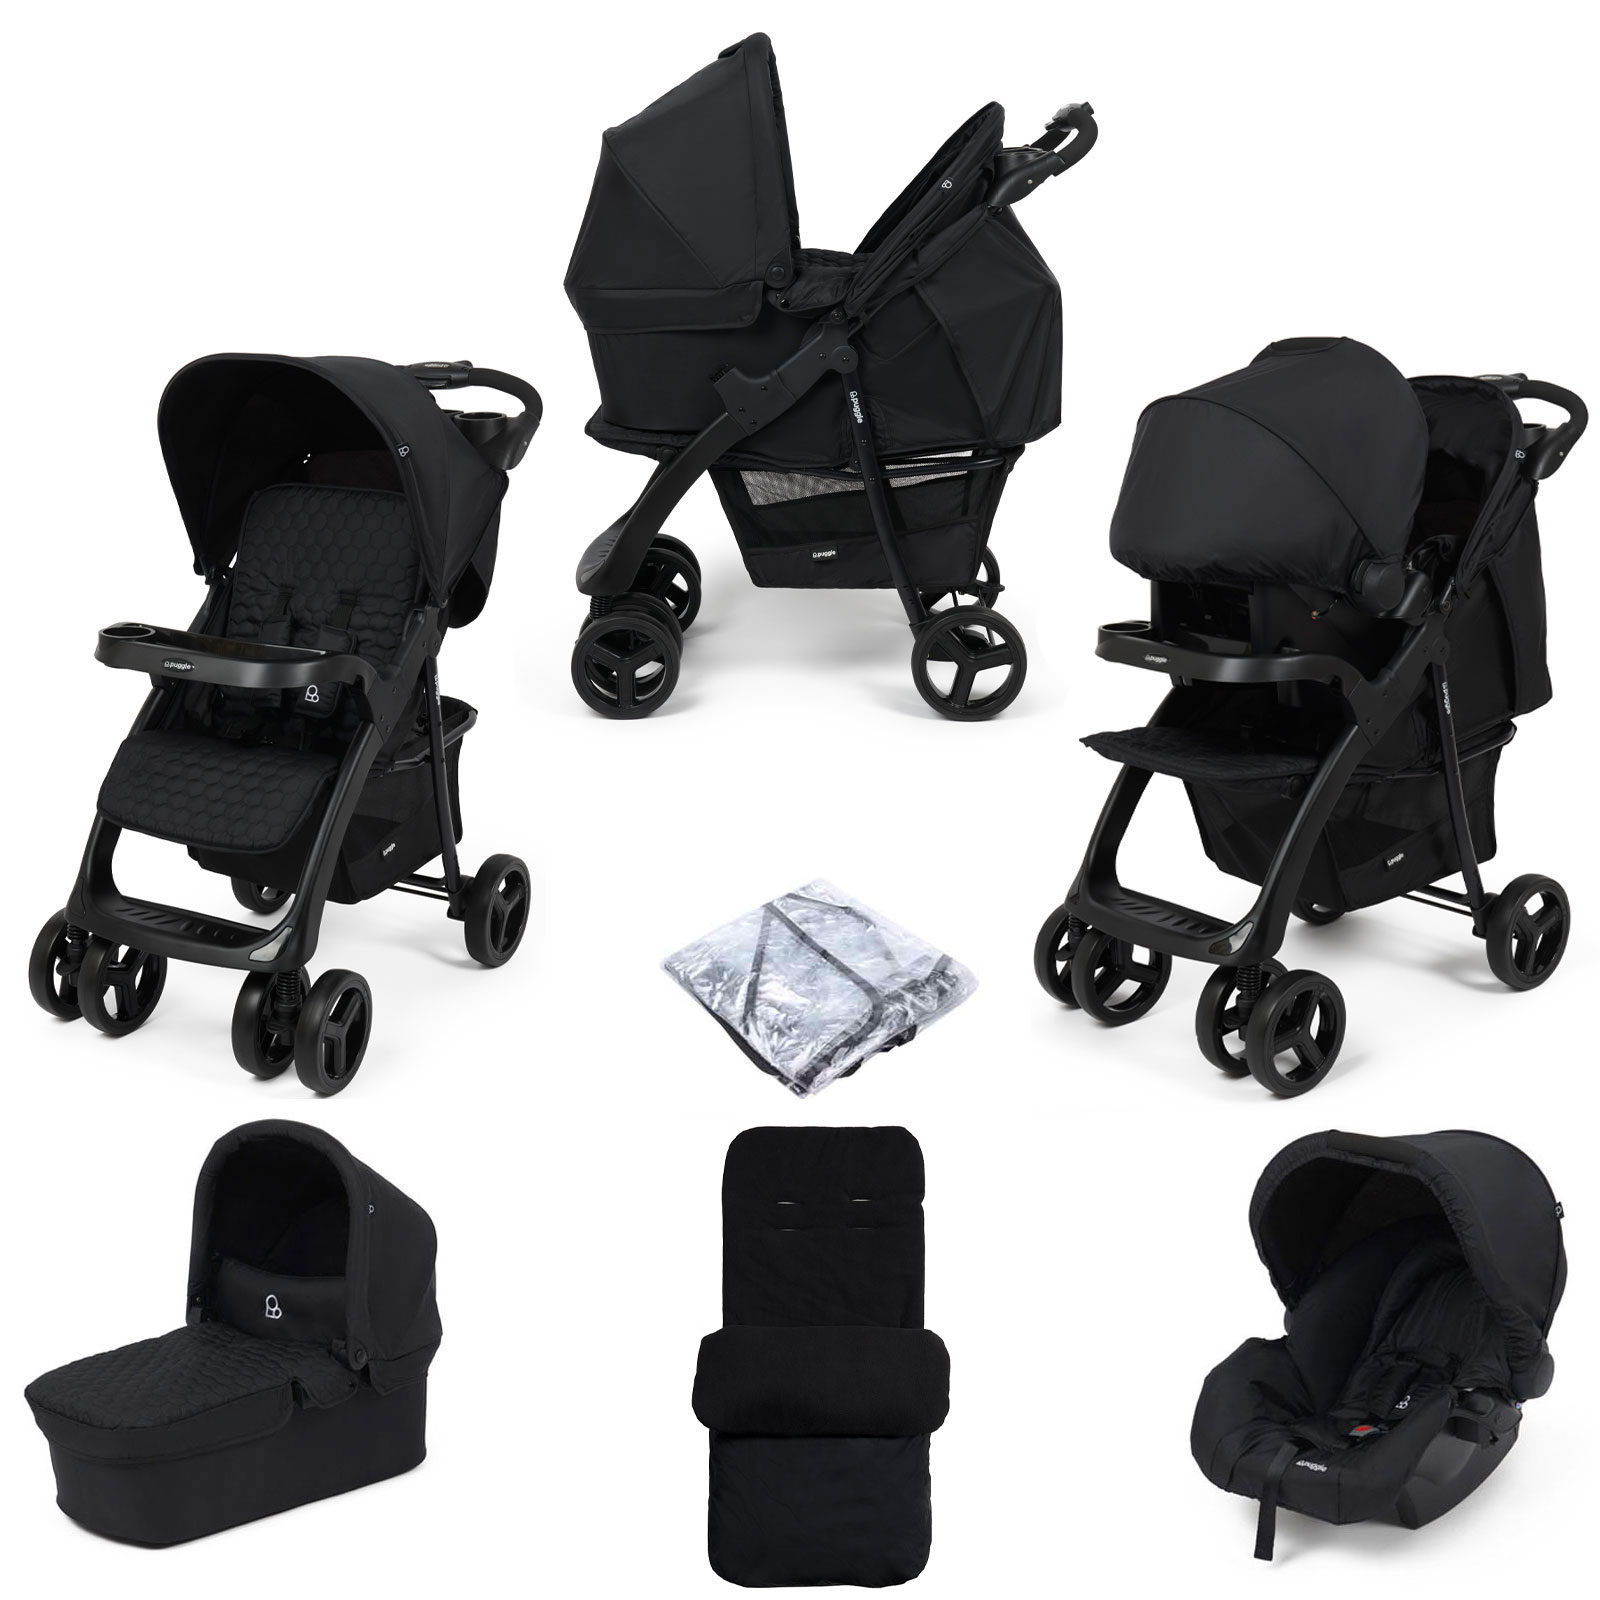 Puggle Denver Luxe 3in1 Travel System with Raincover & Deluxe Footmuff - Storm Black